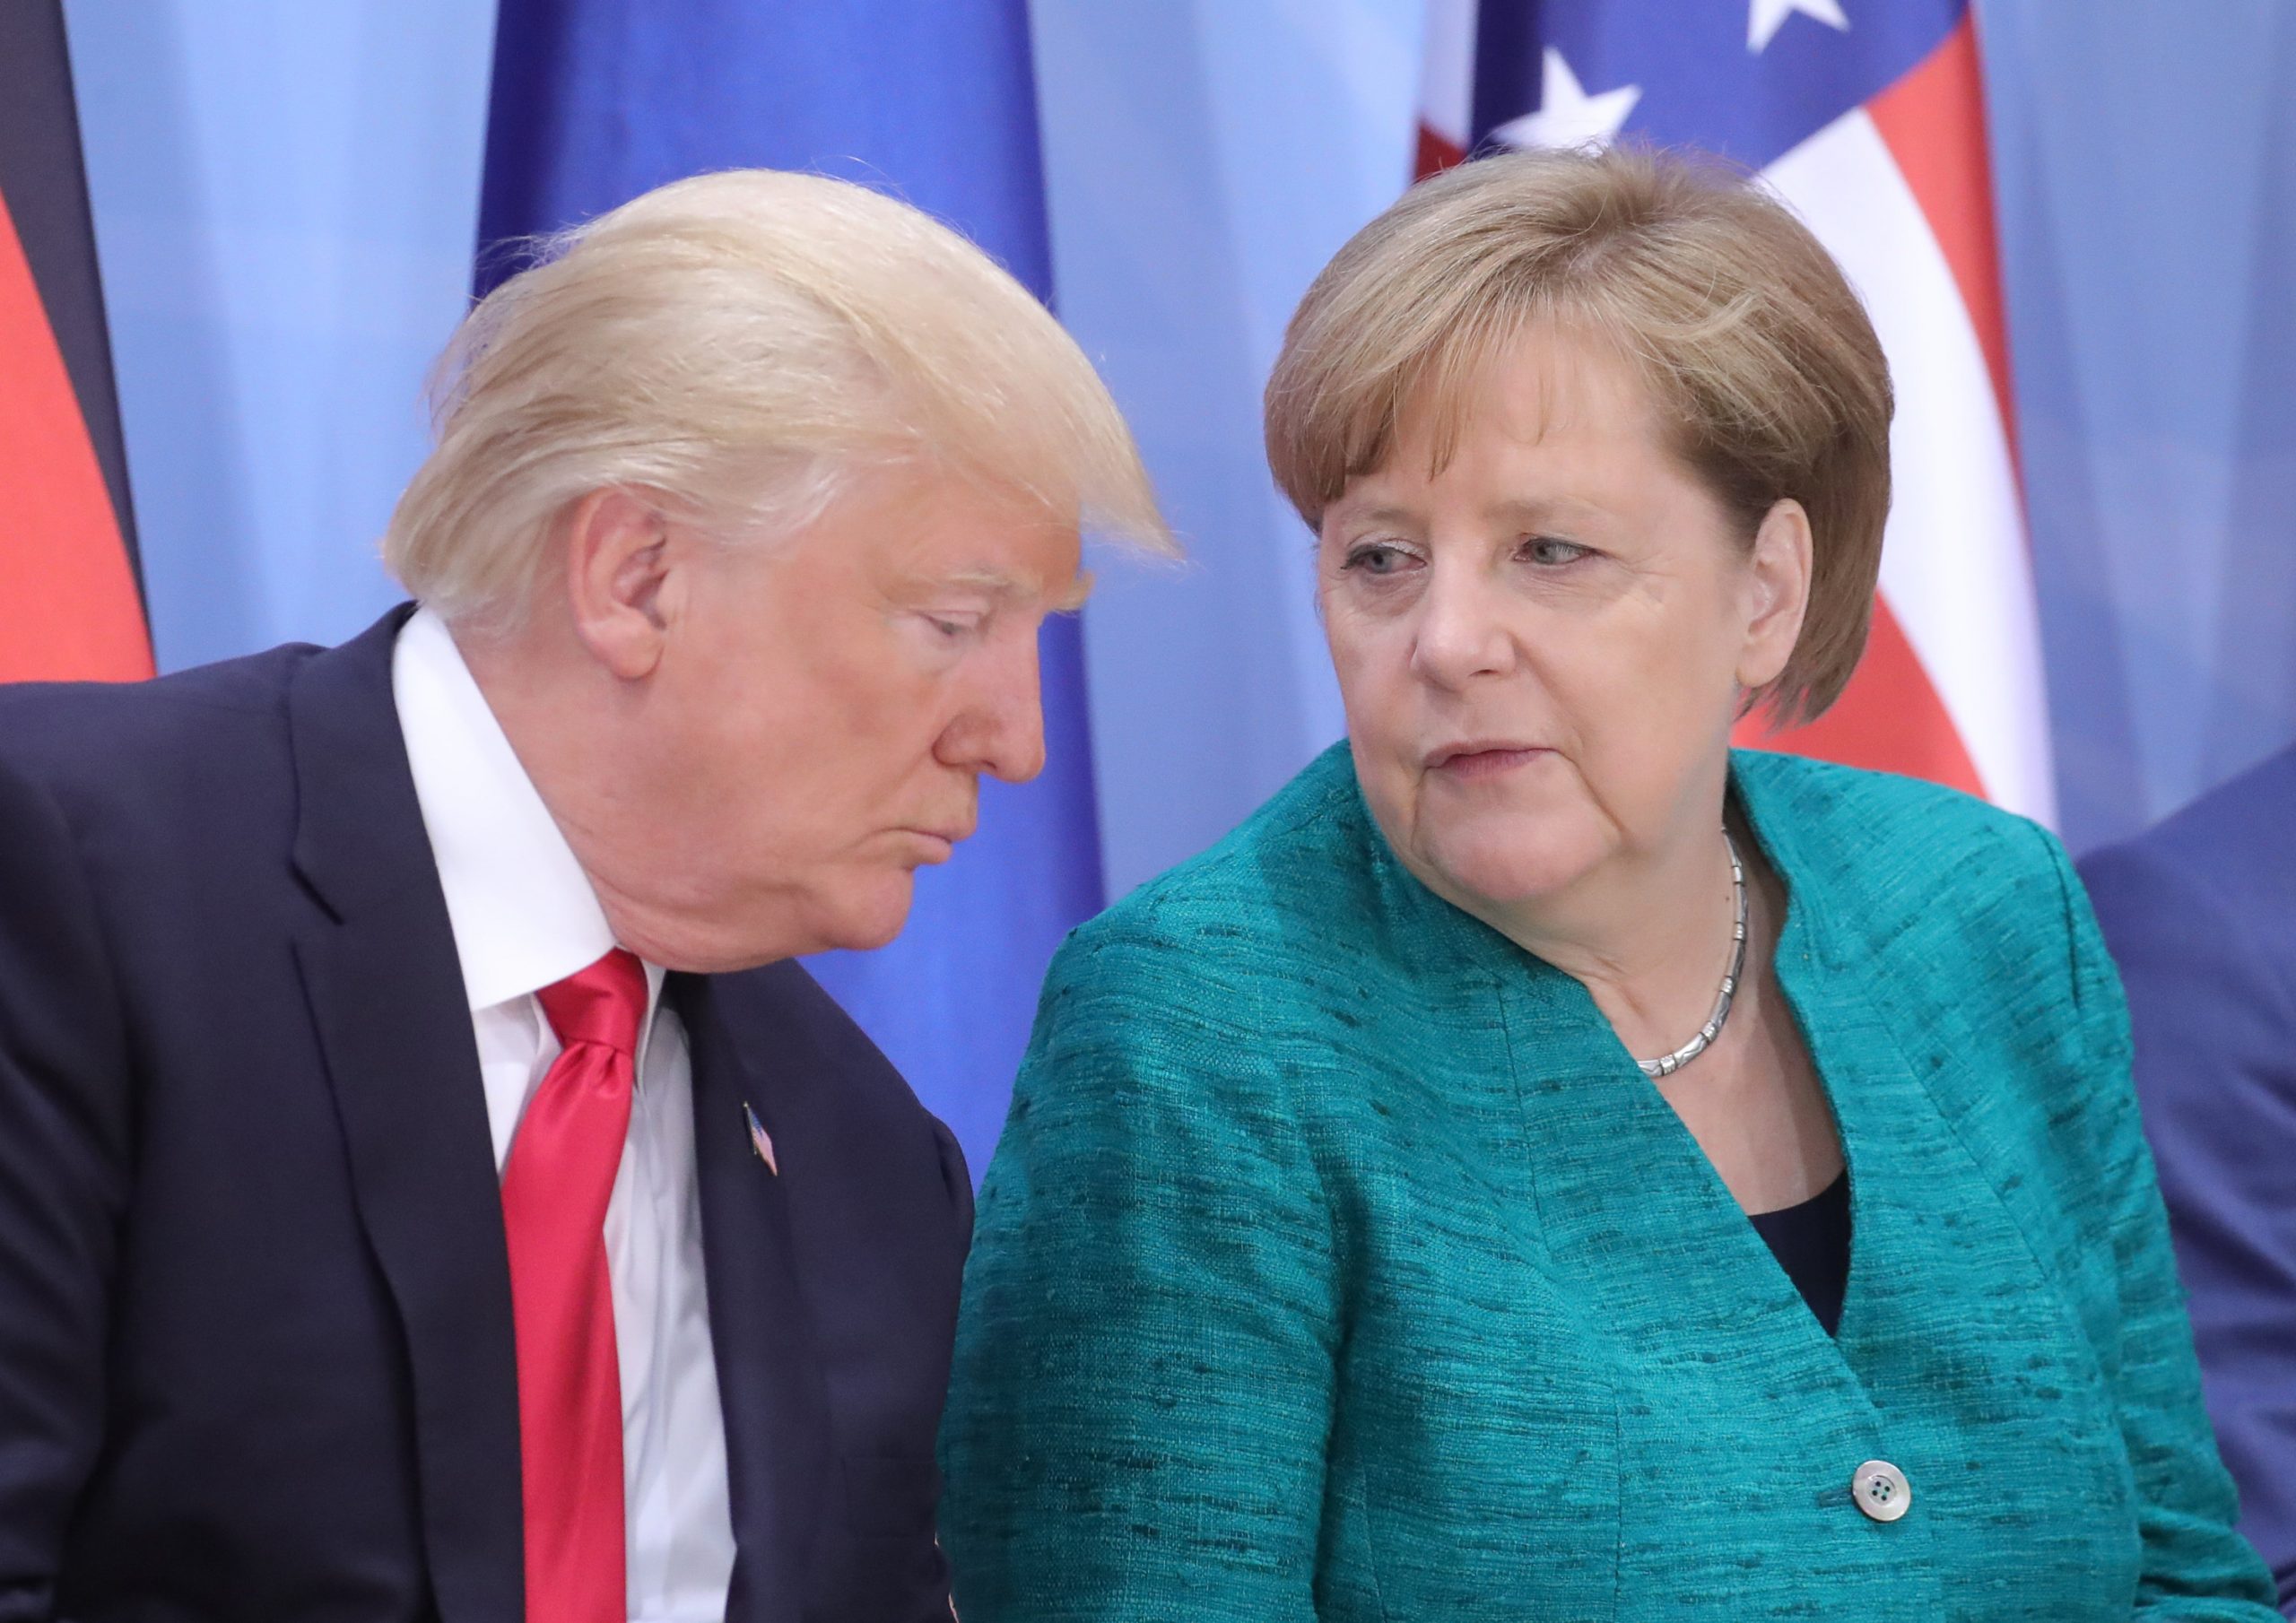 FILED - 08 July 2017, Hamburg: US President Donald Trump (L), speaks with German Chancellor Angela Merkel during a panel discussion at the G20 summit. German Chancellor Angela Merkel has declined an invitation from US President Donald Trump to the upcoming G7 summit "given the overall pandemic situation," a government spokesman said Saturday. Photo: Michael Kappeler/dpa-Pool/dpa